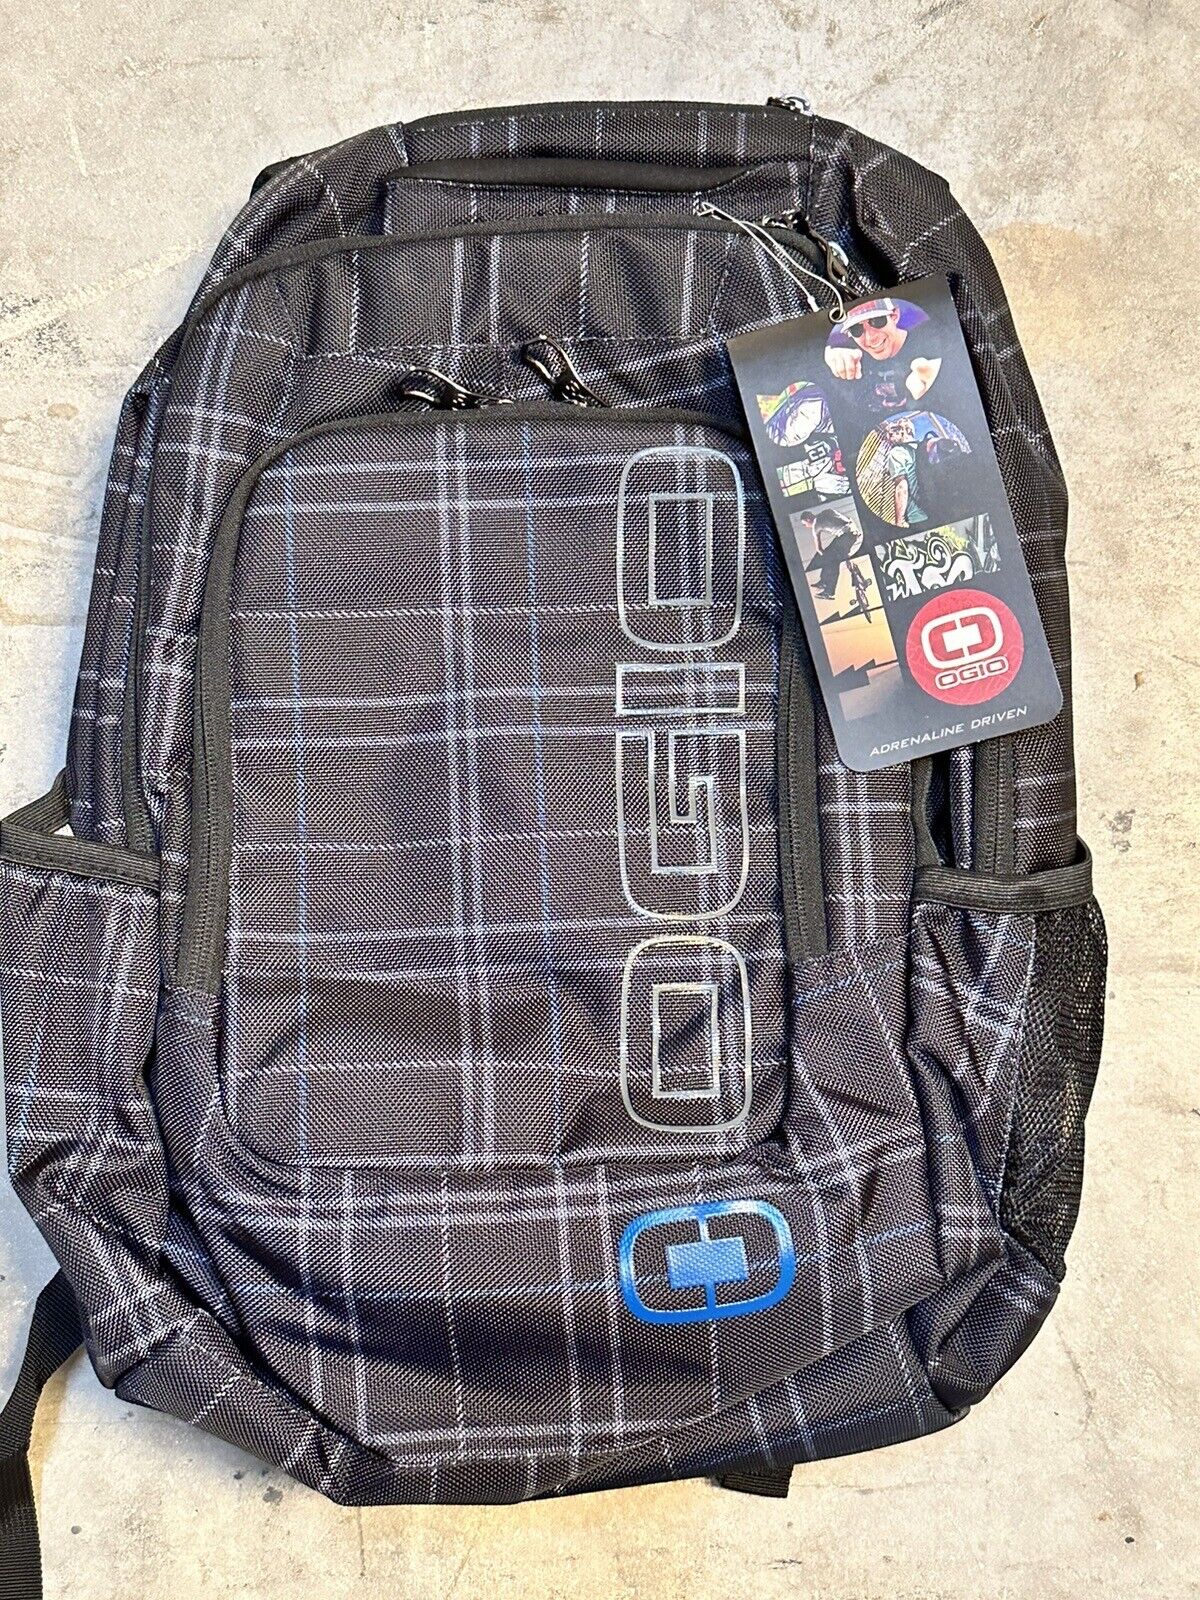 New Ogio Backpack Fits 17” Laptop Warehouse Overstock (new old stock) Black Blue